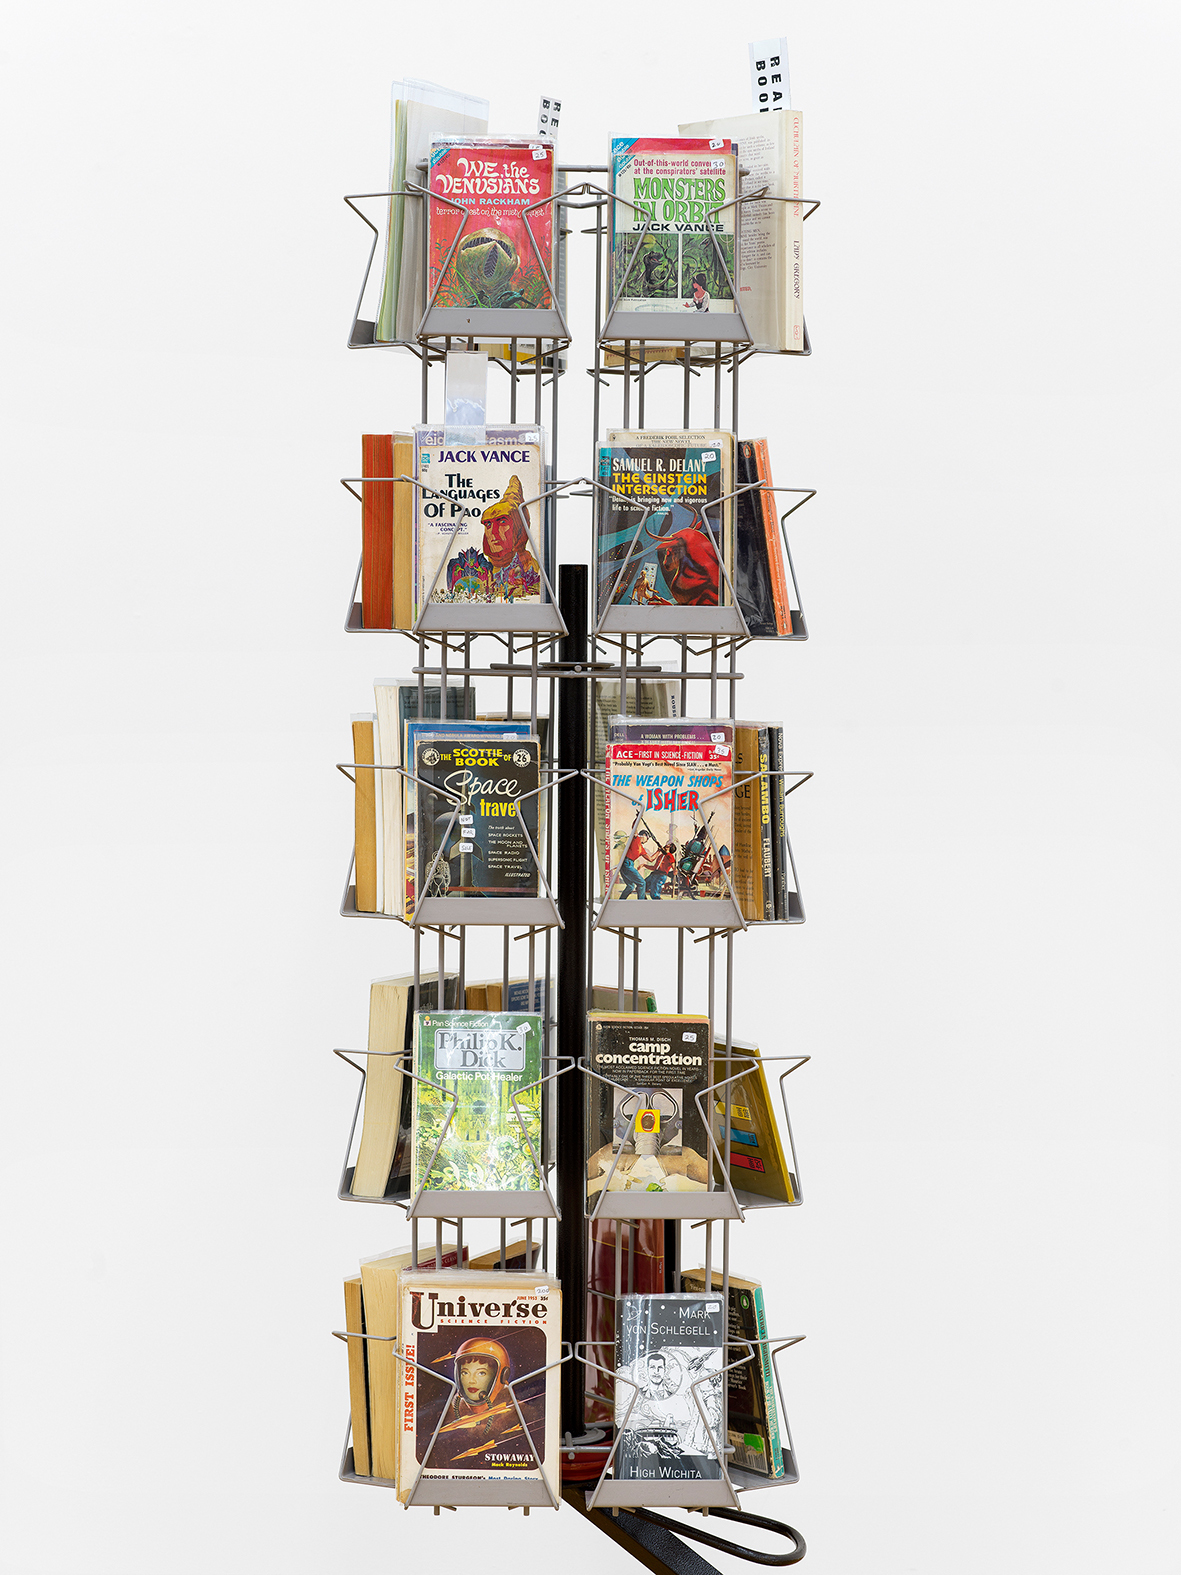 Mark von Schlegell, Real Books Stand, Real Books and Book Stand, 2022 / Photo: Cedric Mussano / Courtesy: the artist and Kirchgasse Gallery